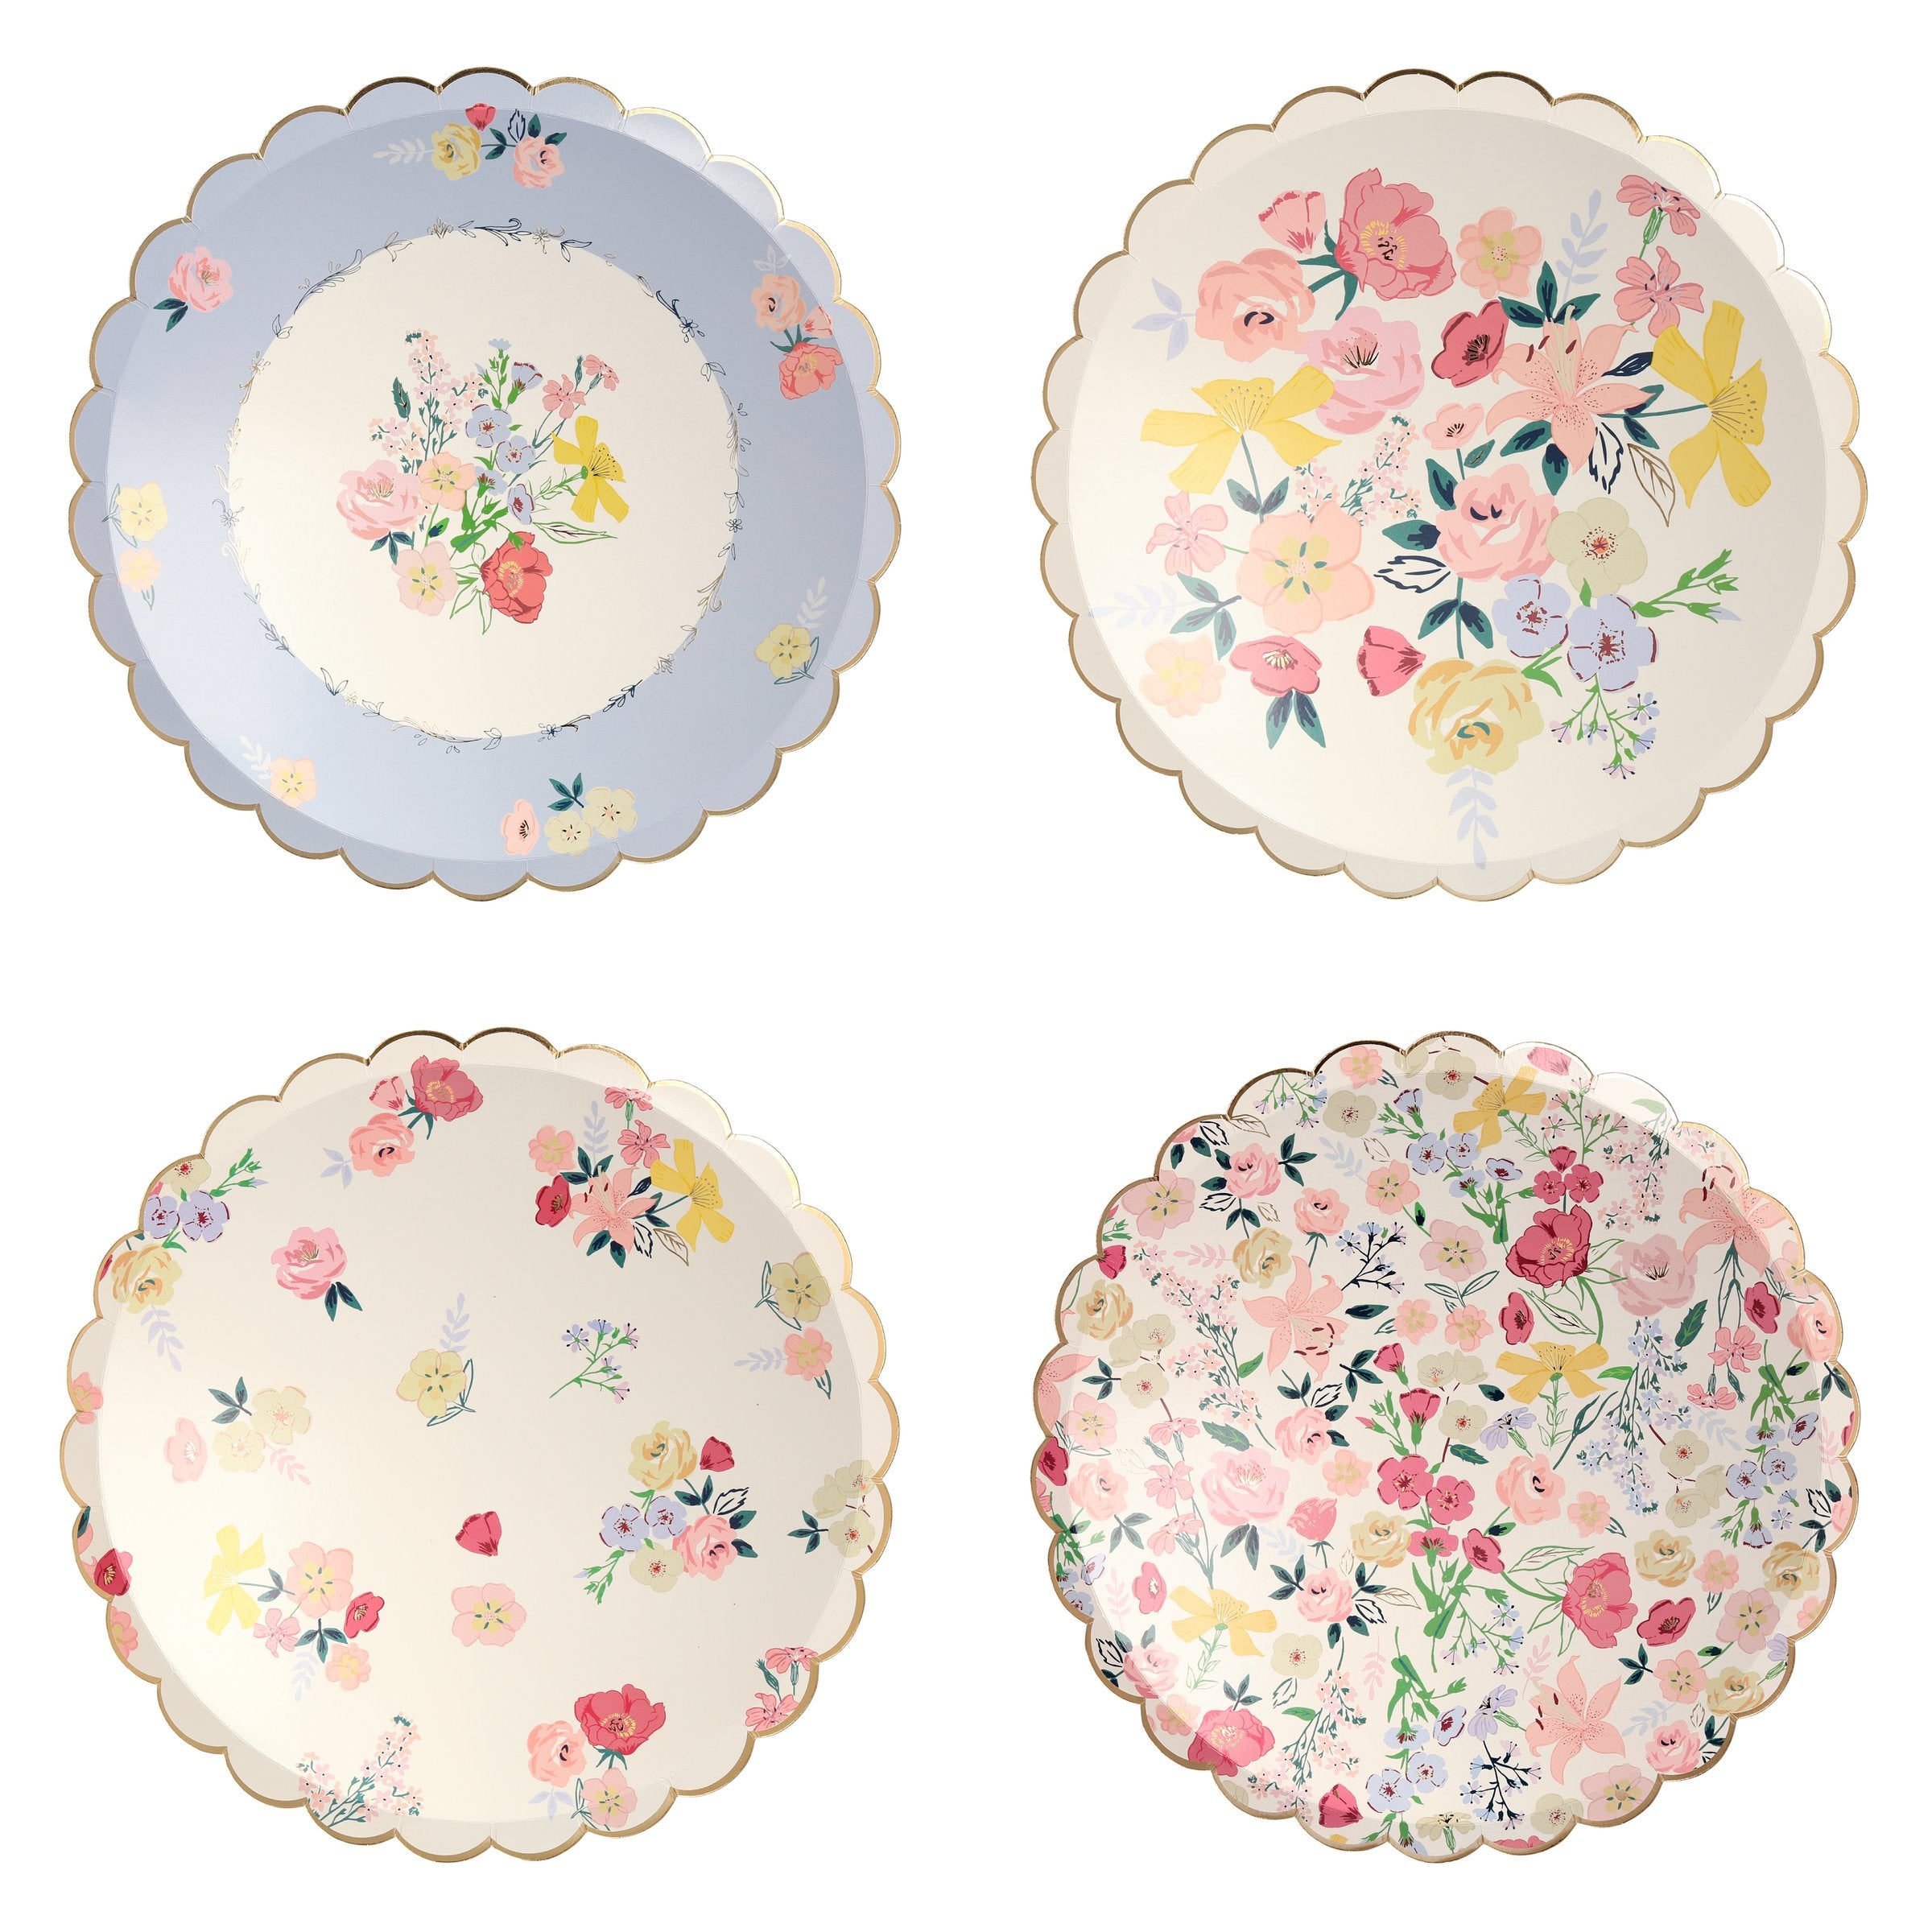 Our party plates, with beautiful flower designs,  look amazing at a picnic, garden party or anywhere you want the beauty of nature.